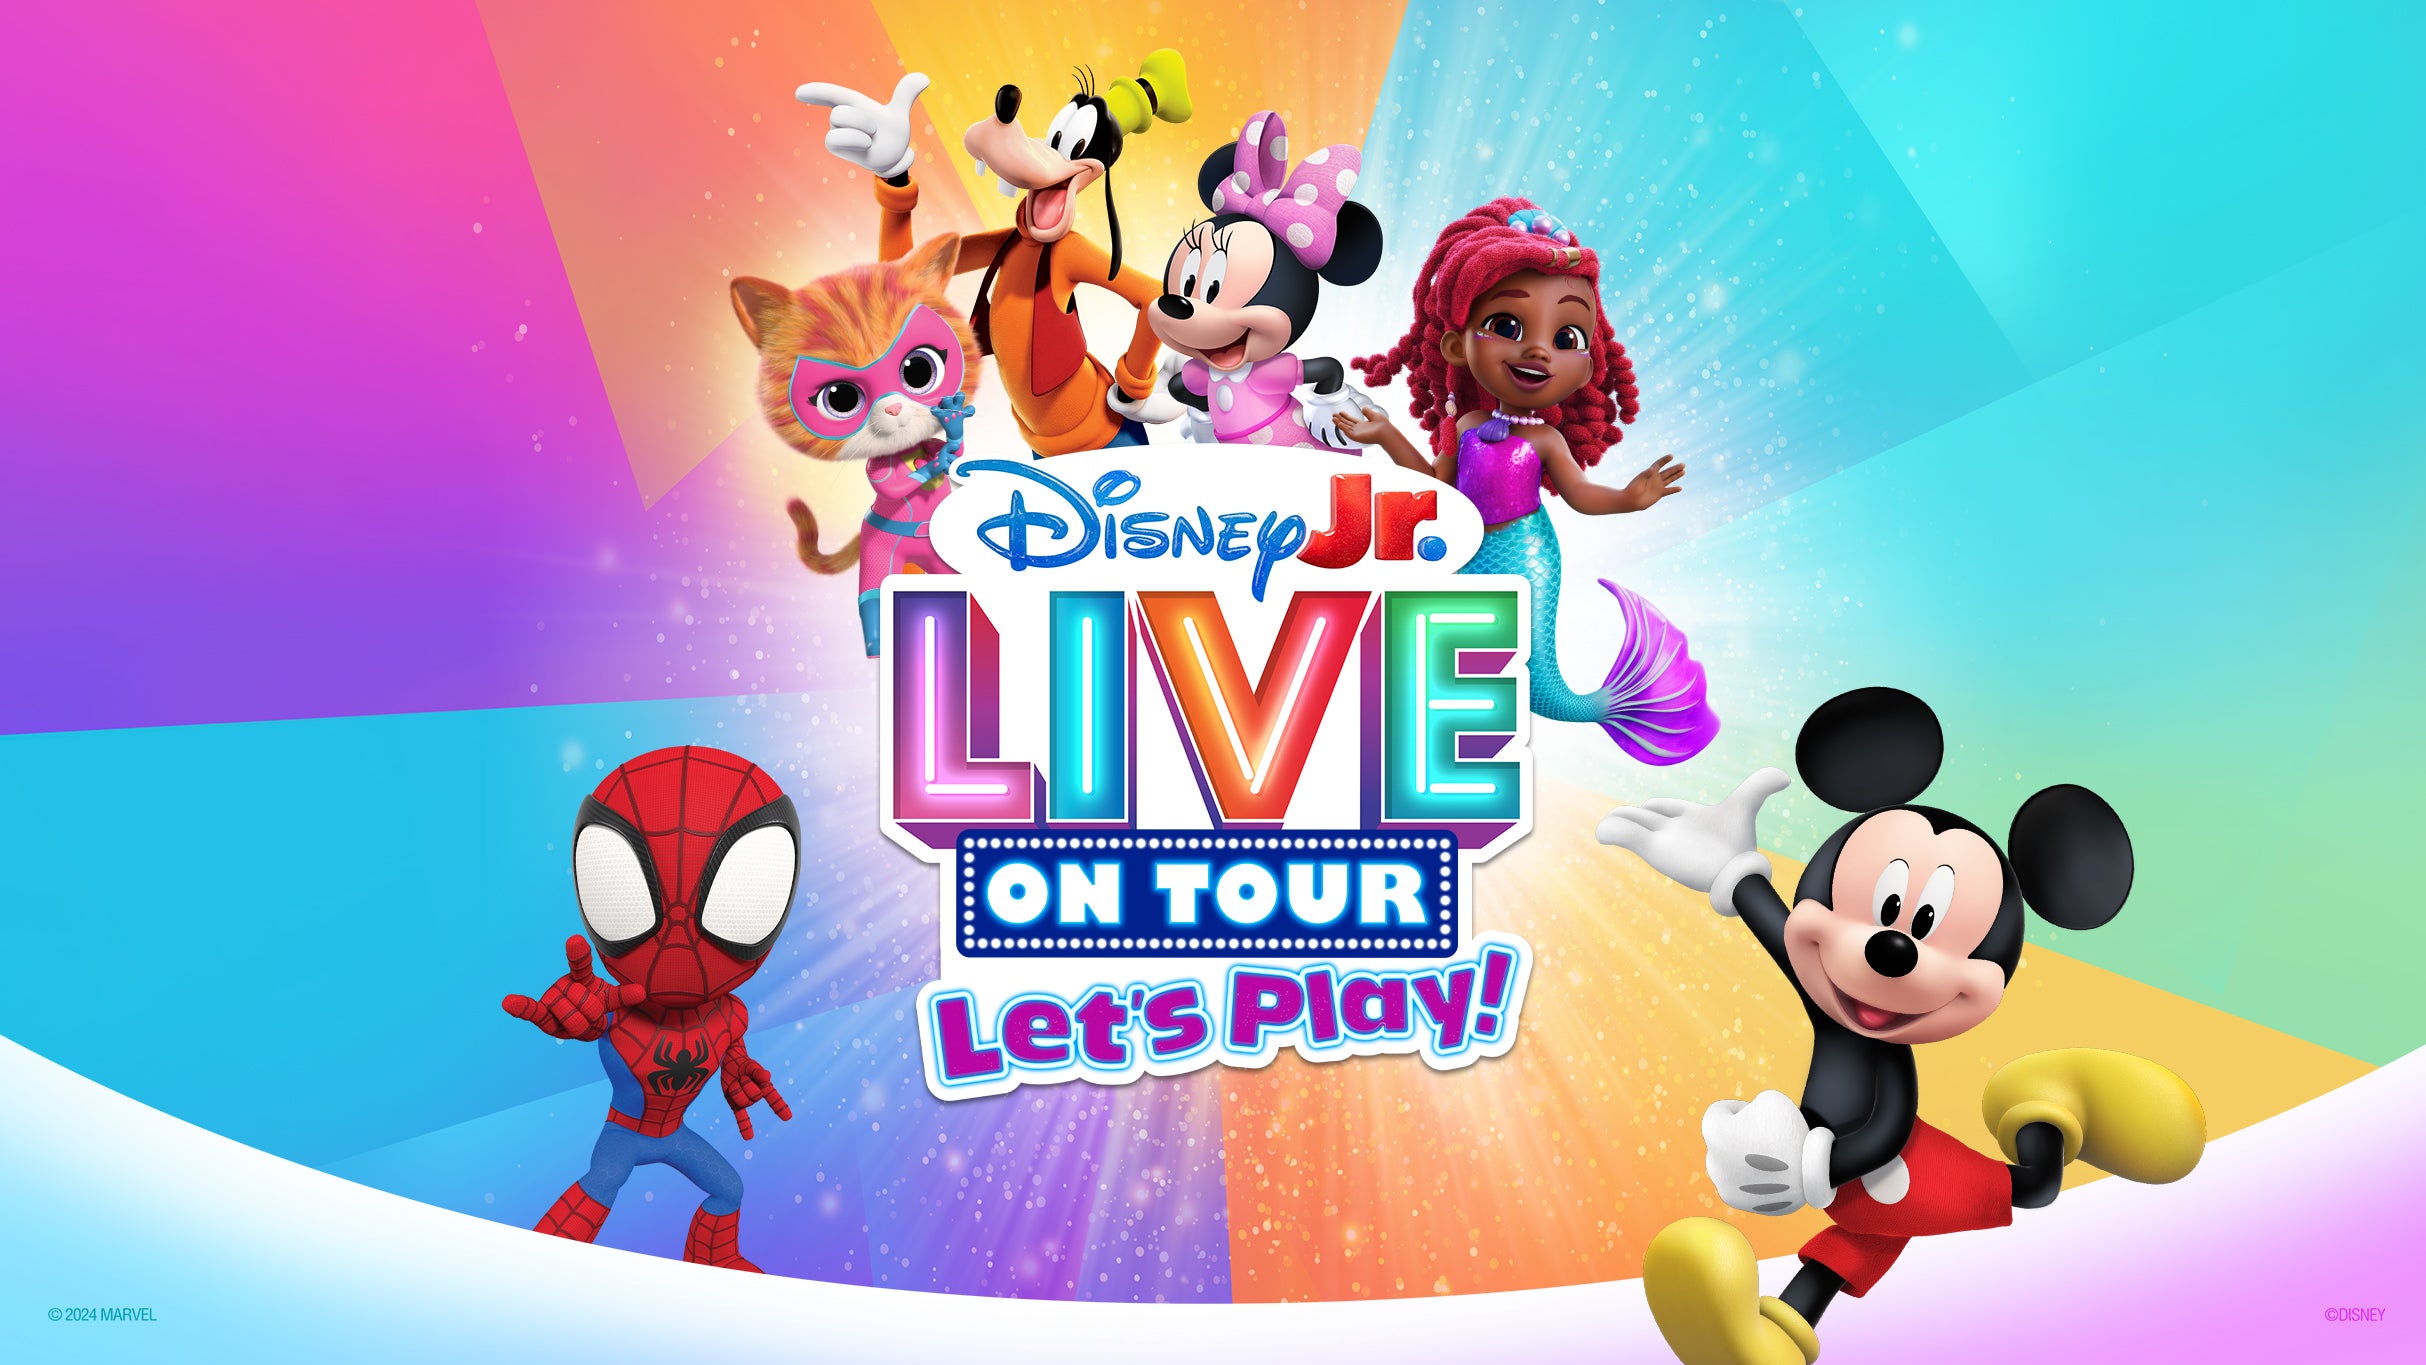 Disney Jr. Live On Tour: Let's Play presale code for show tickets in Saint Charles, MO (Family Arena)